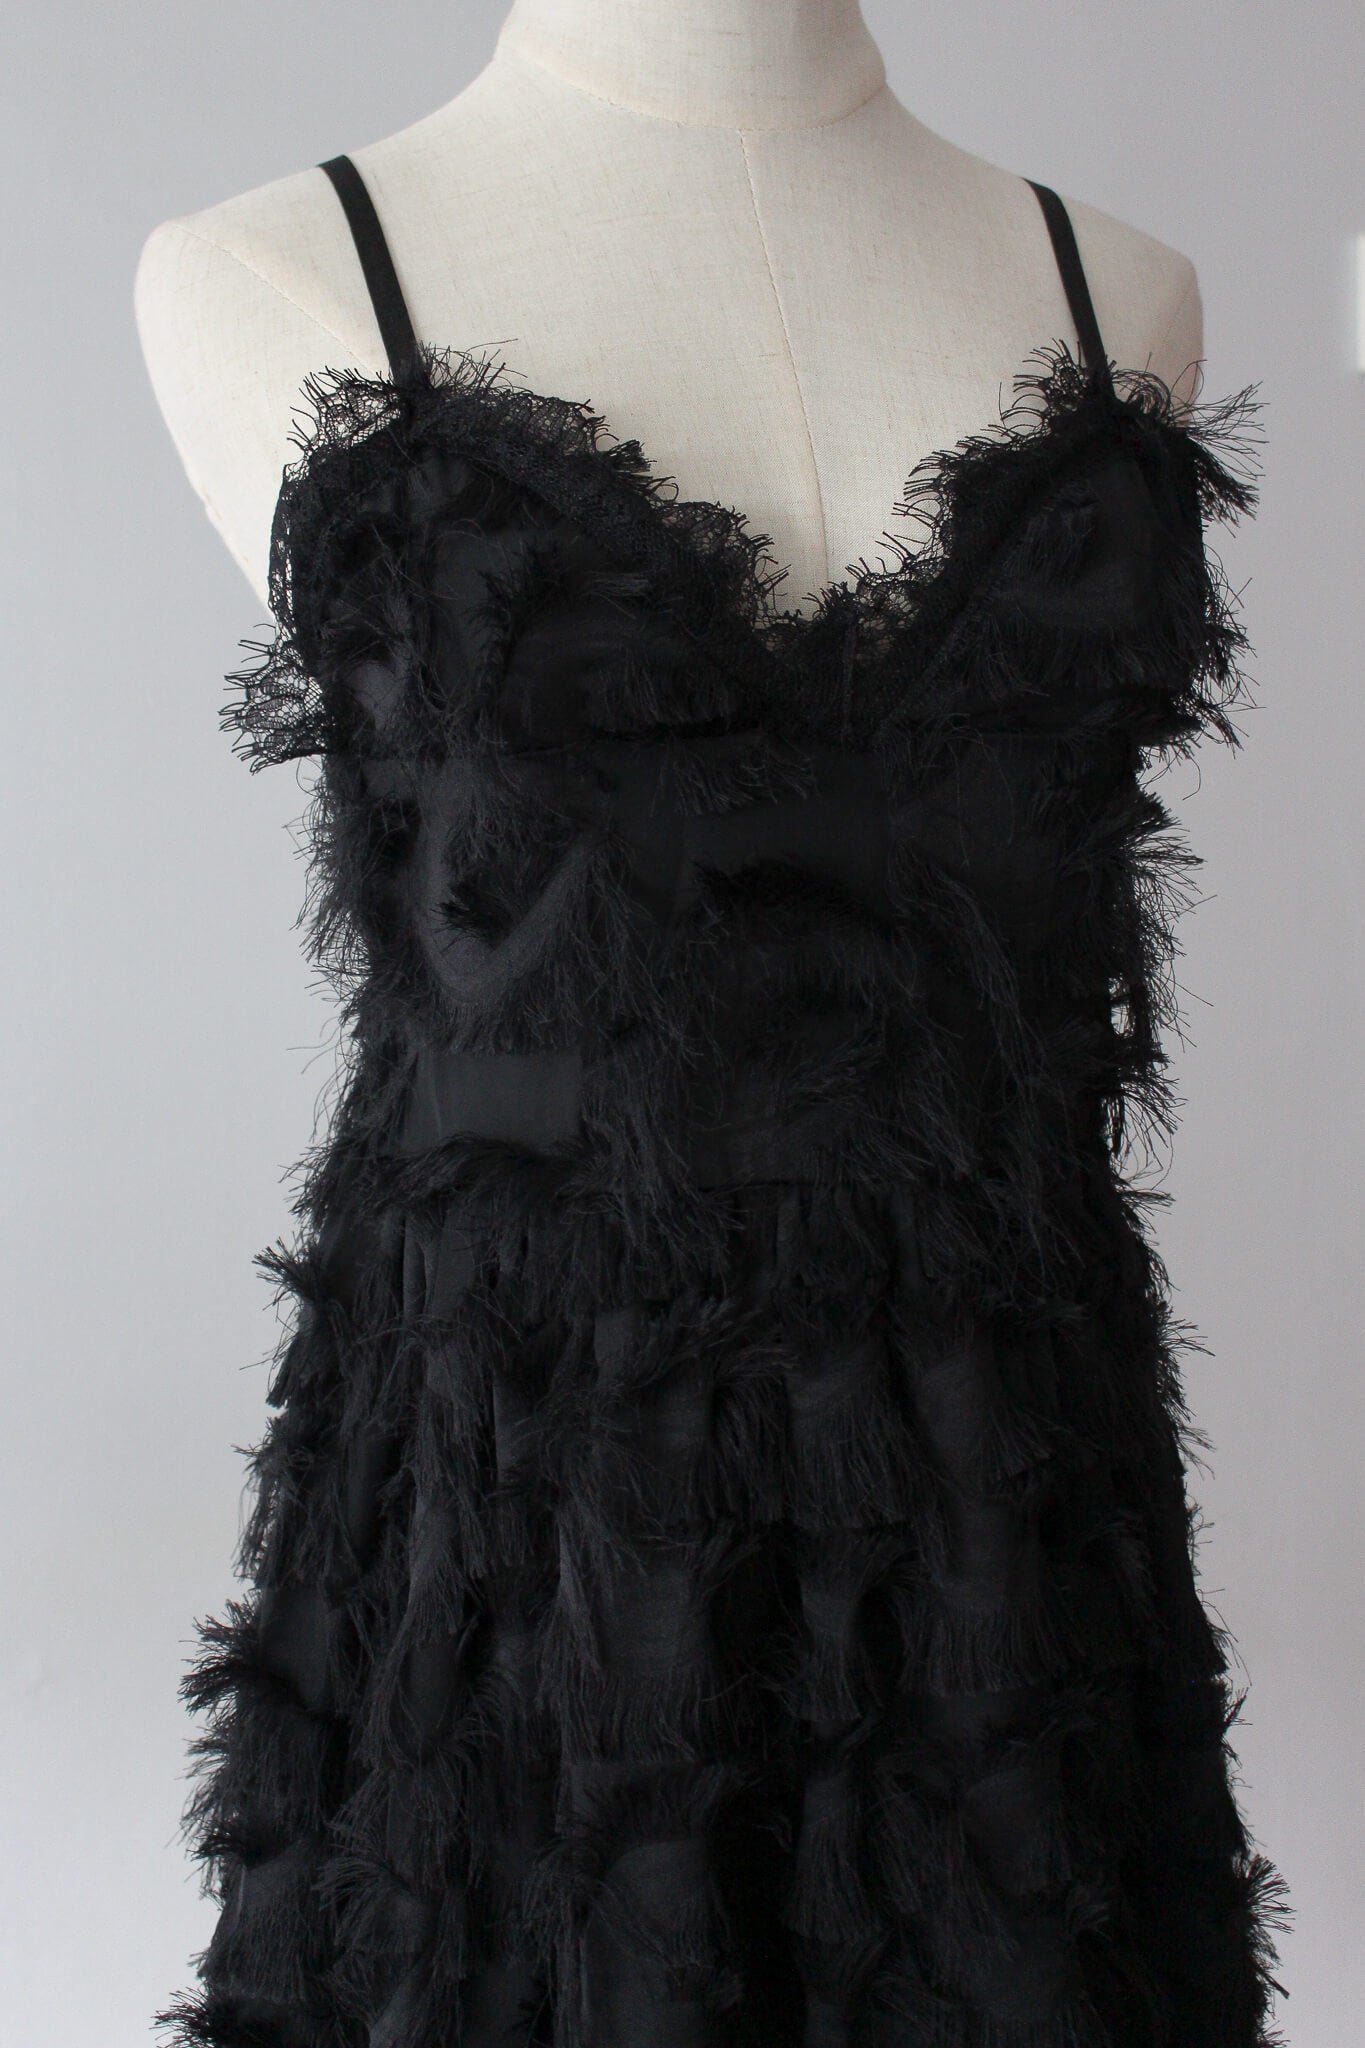 A feathery lightweight minidress with adjustable straps. Suitable for parties and date nights. 